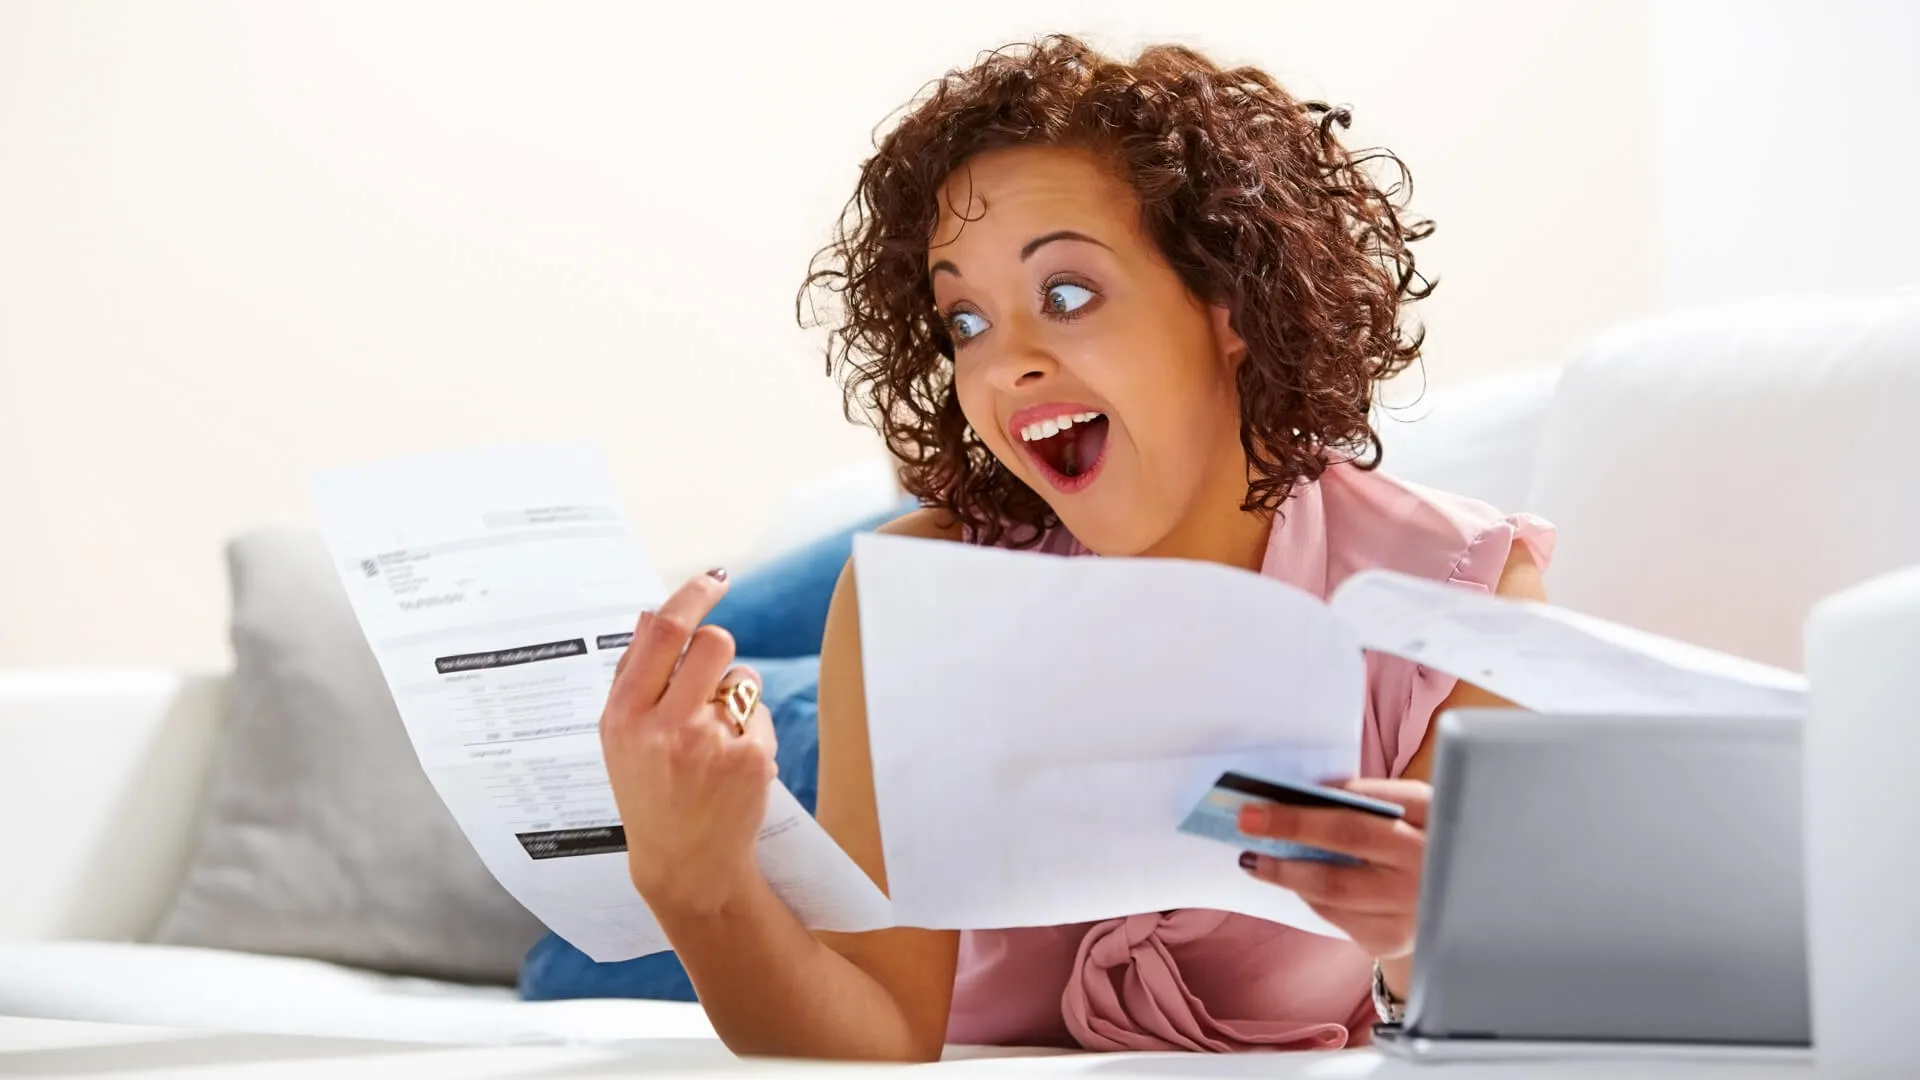 Image of young lady looking excited after looking at her credit card bill.